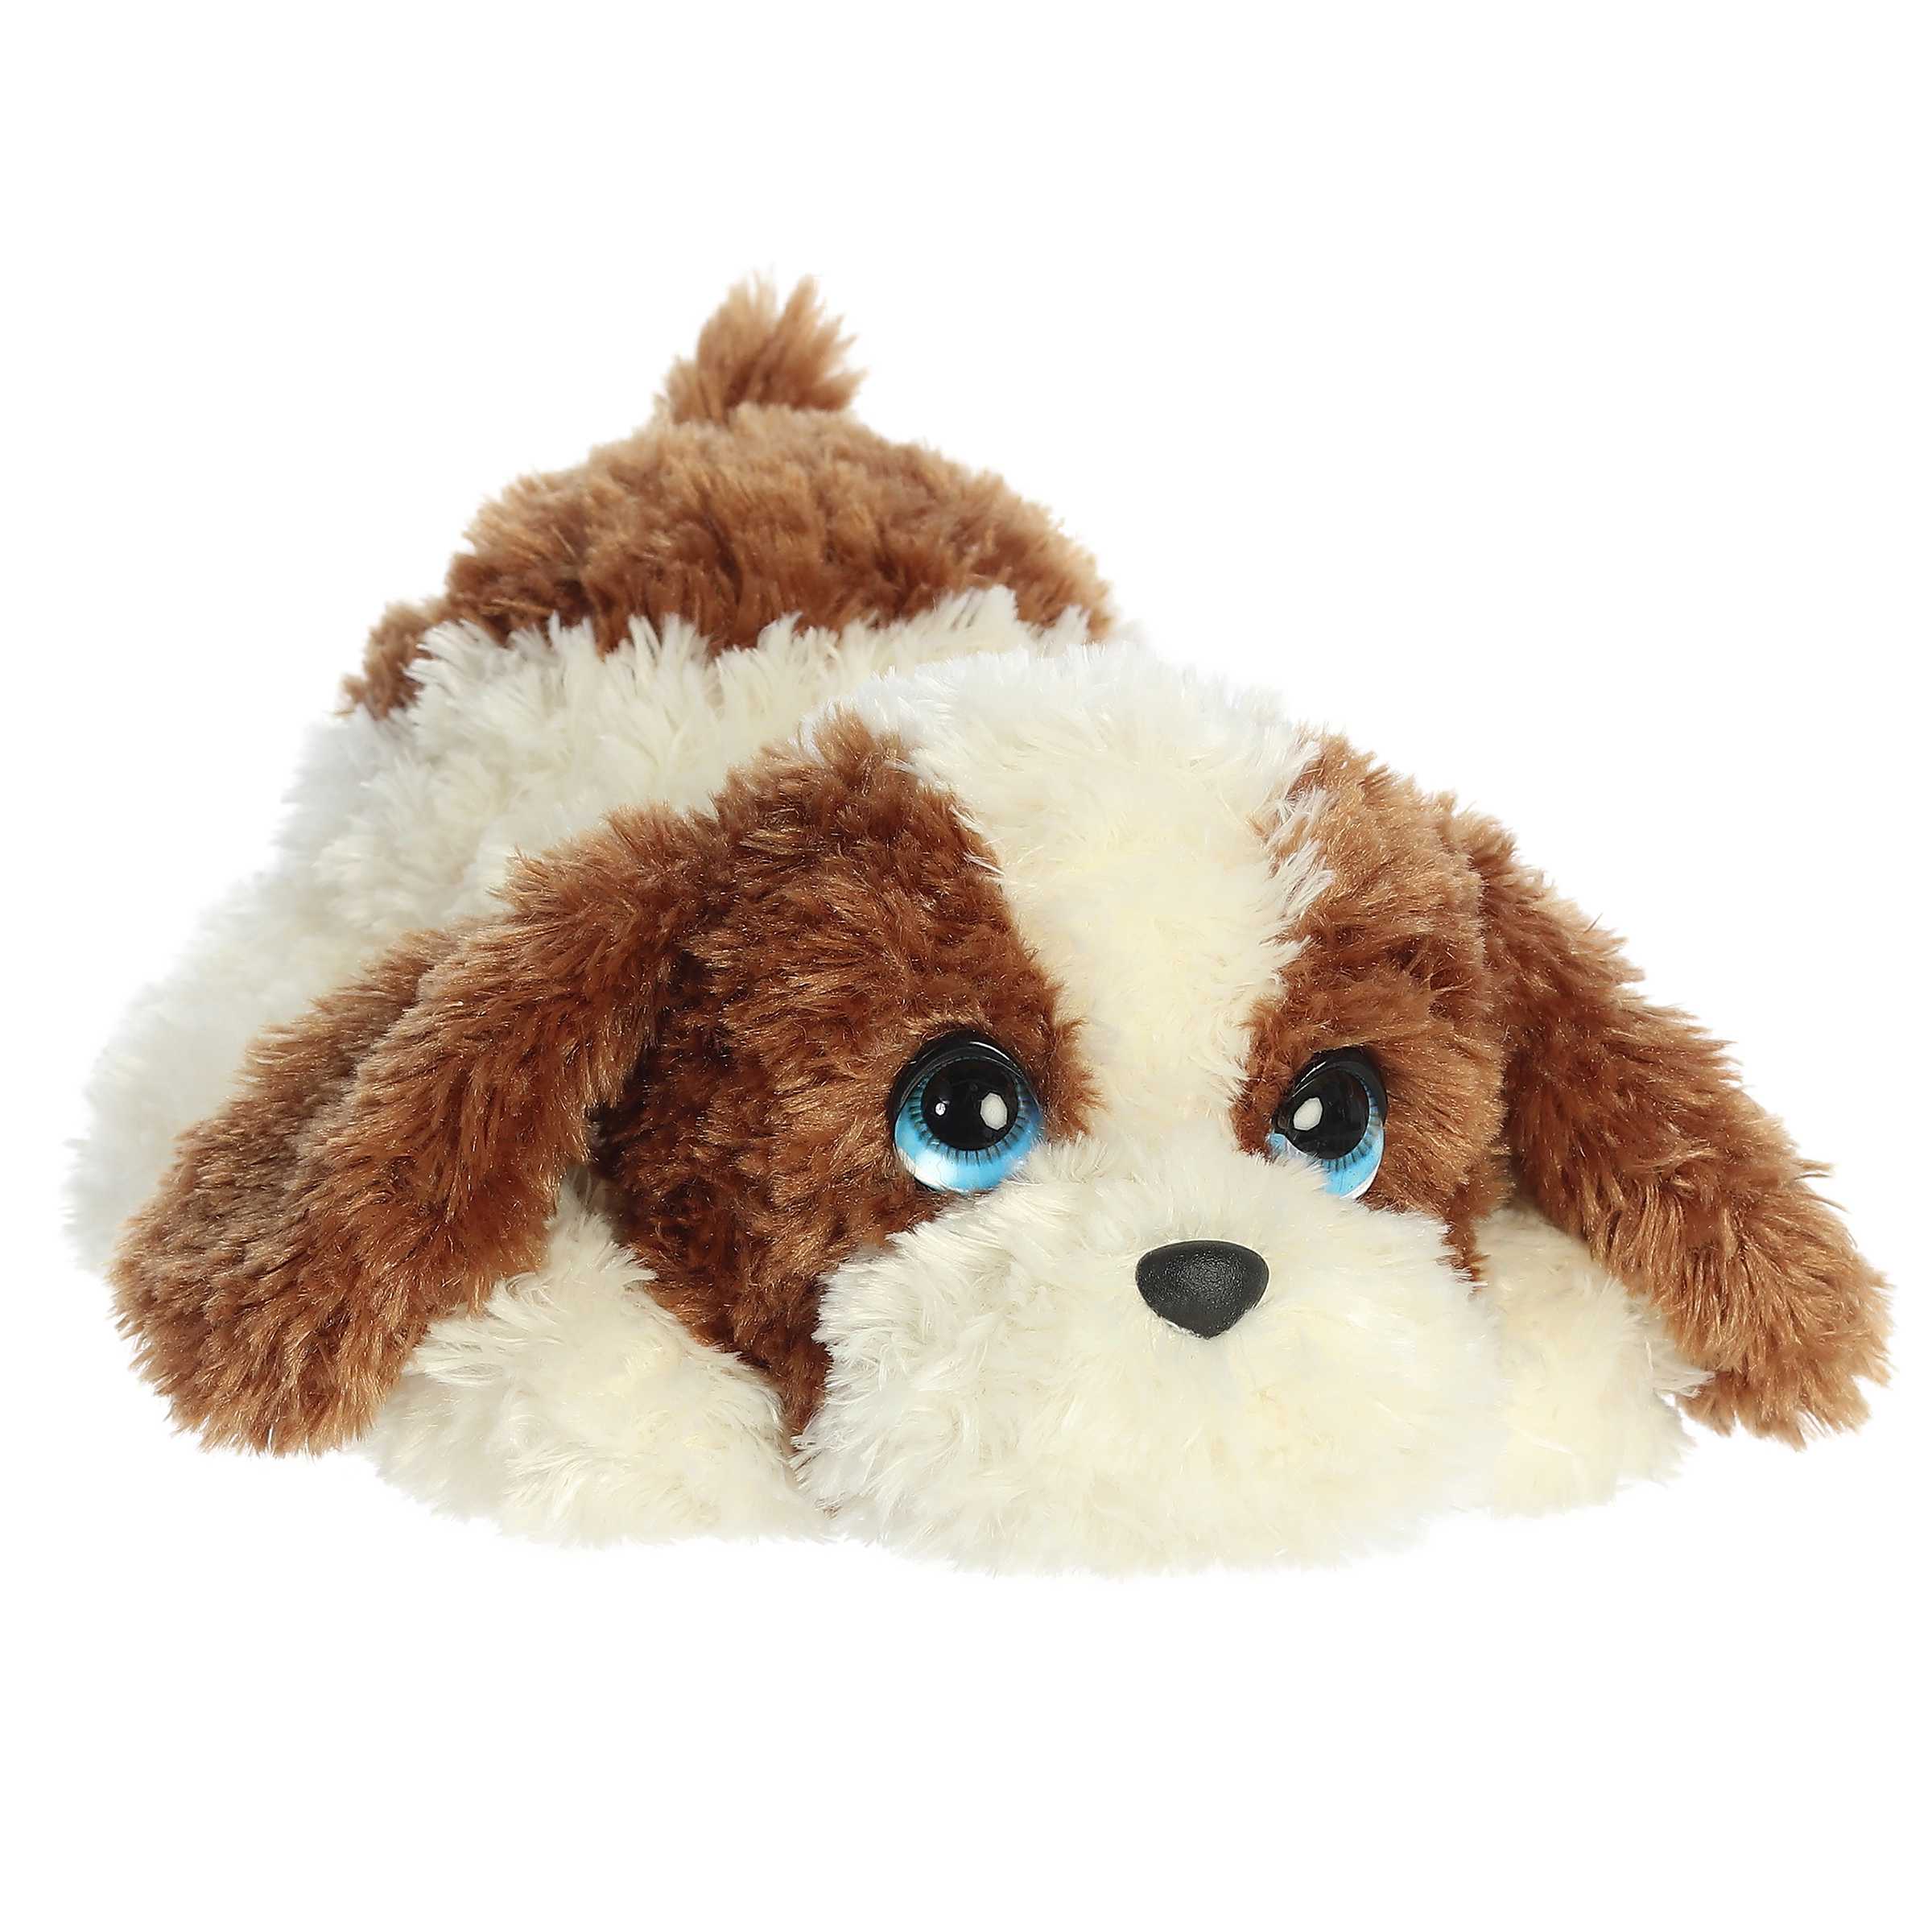 Adorable Jewell Shih Tzu puppy plush with big blue eyes, white & brown fur, poised for playful adventures.